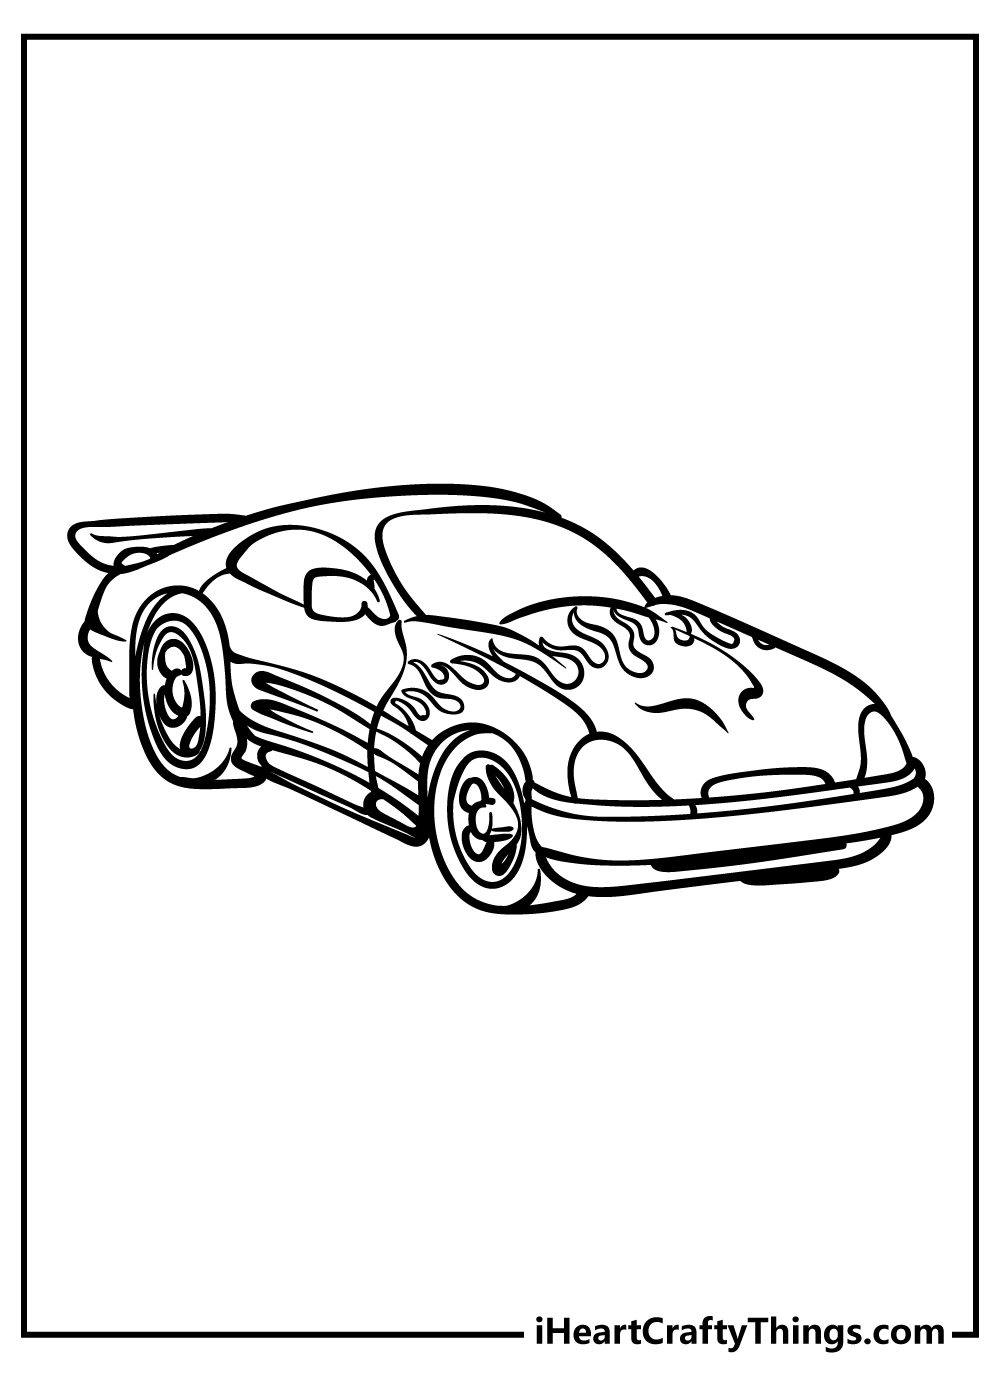 Printable Race Car Coloring Pages Updated 20